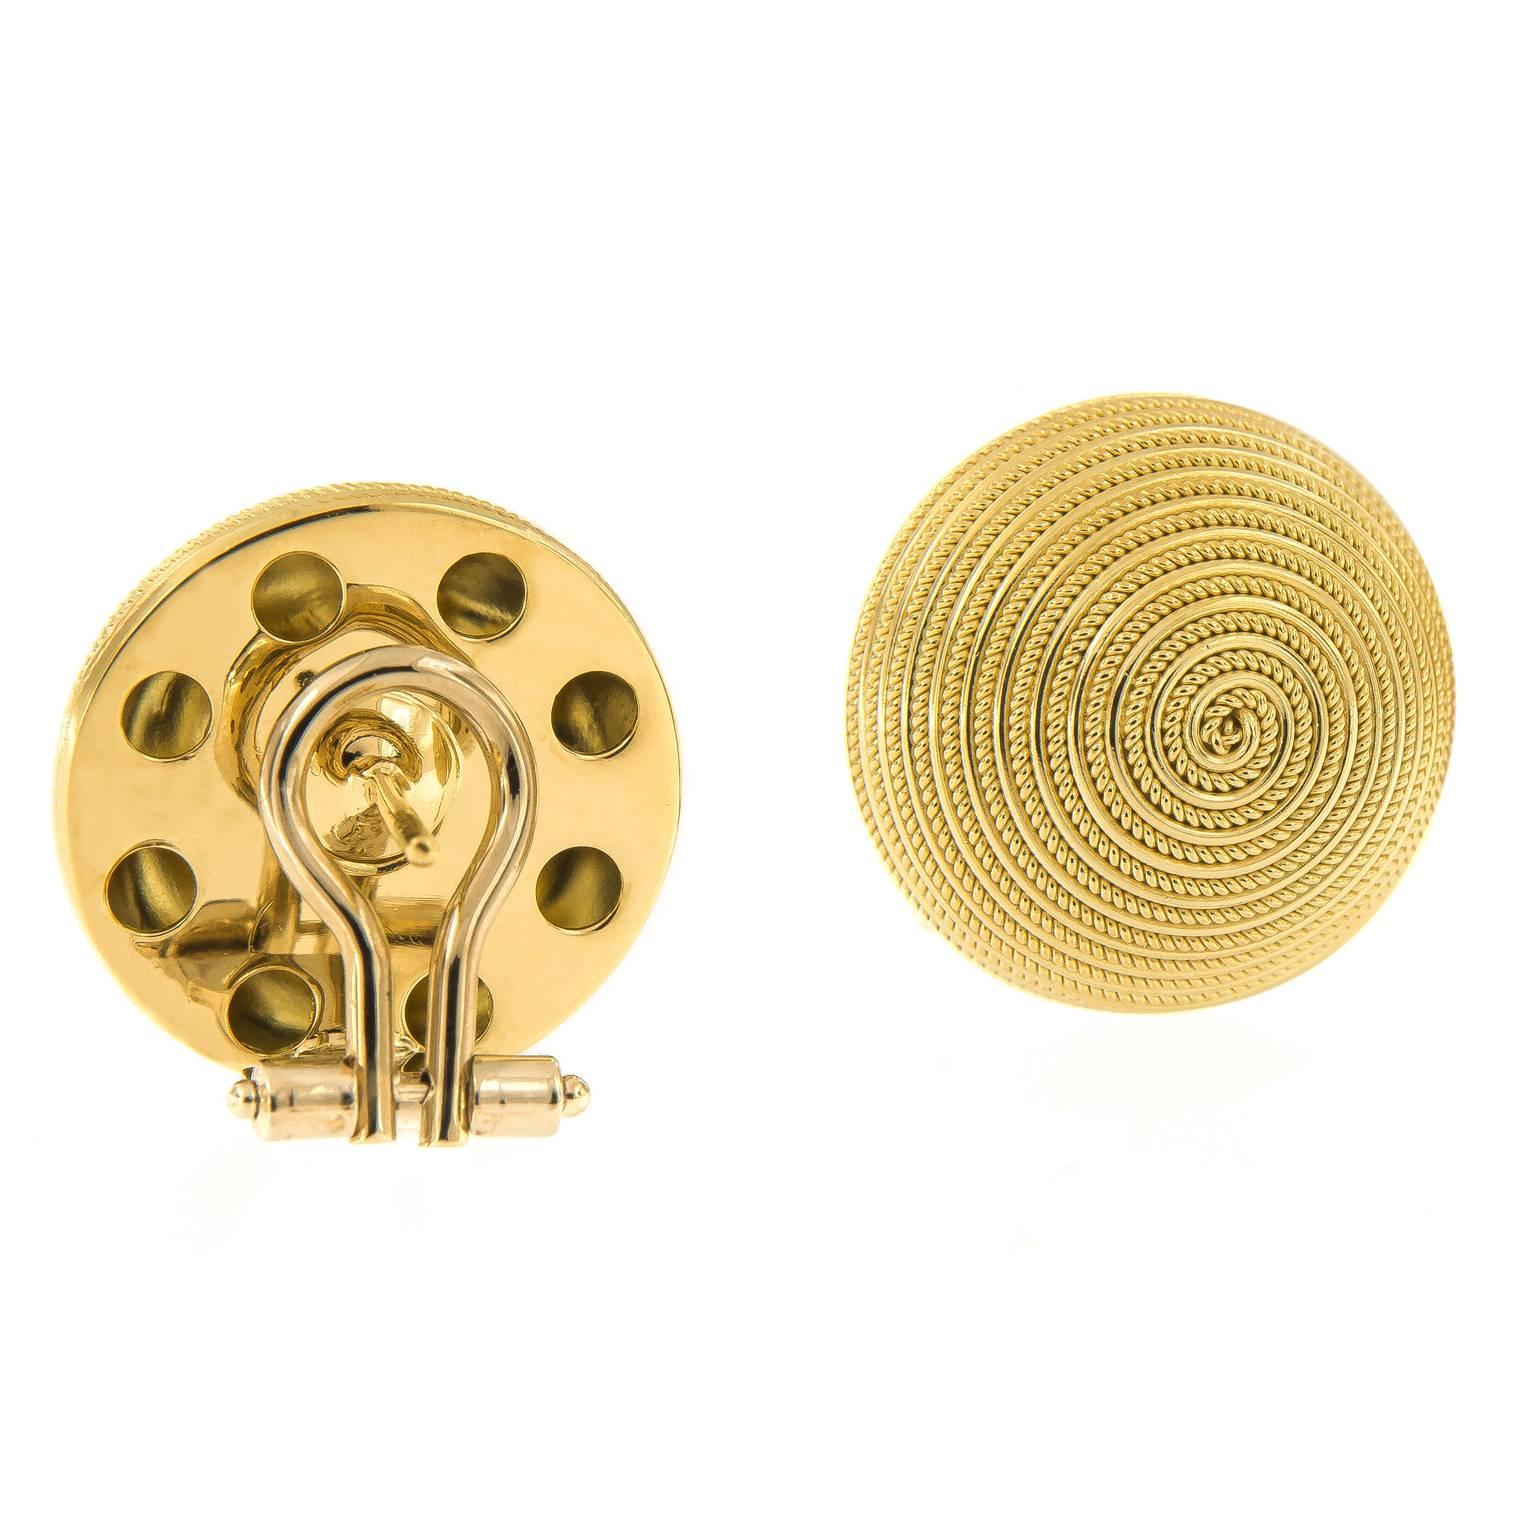 Vintage style coil rope design clip-on earrings are beautifully hand-crafted in 18k yellow gold. They feature exceptionally executed rope work to make a dome shape. Earrings are 17.7 mm diameter and weigh 14 grams total.

Marked Italy